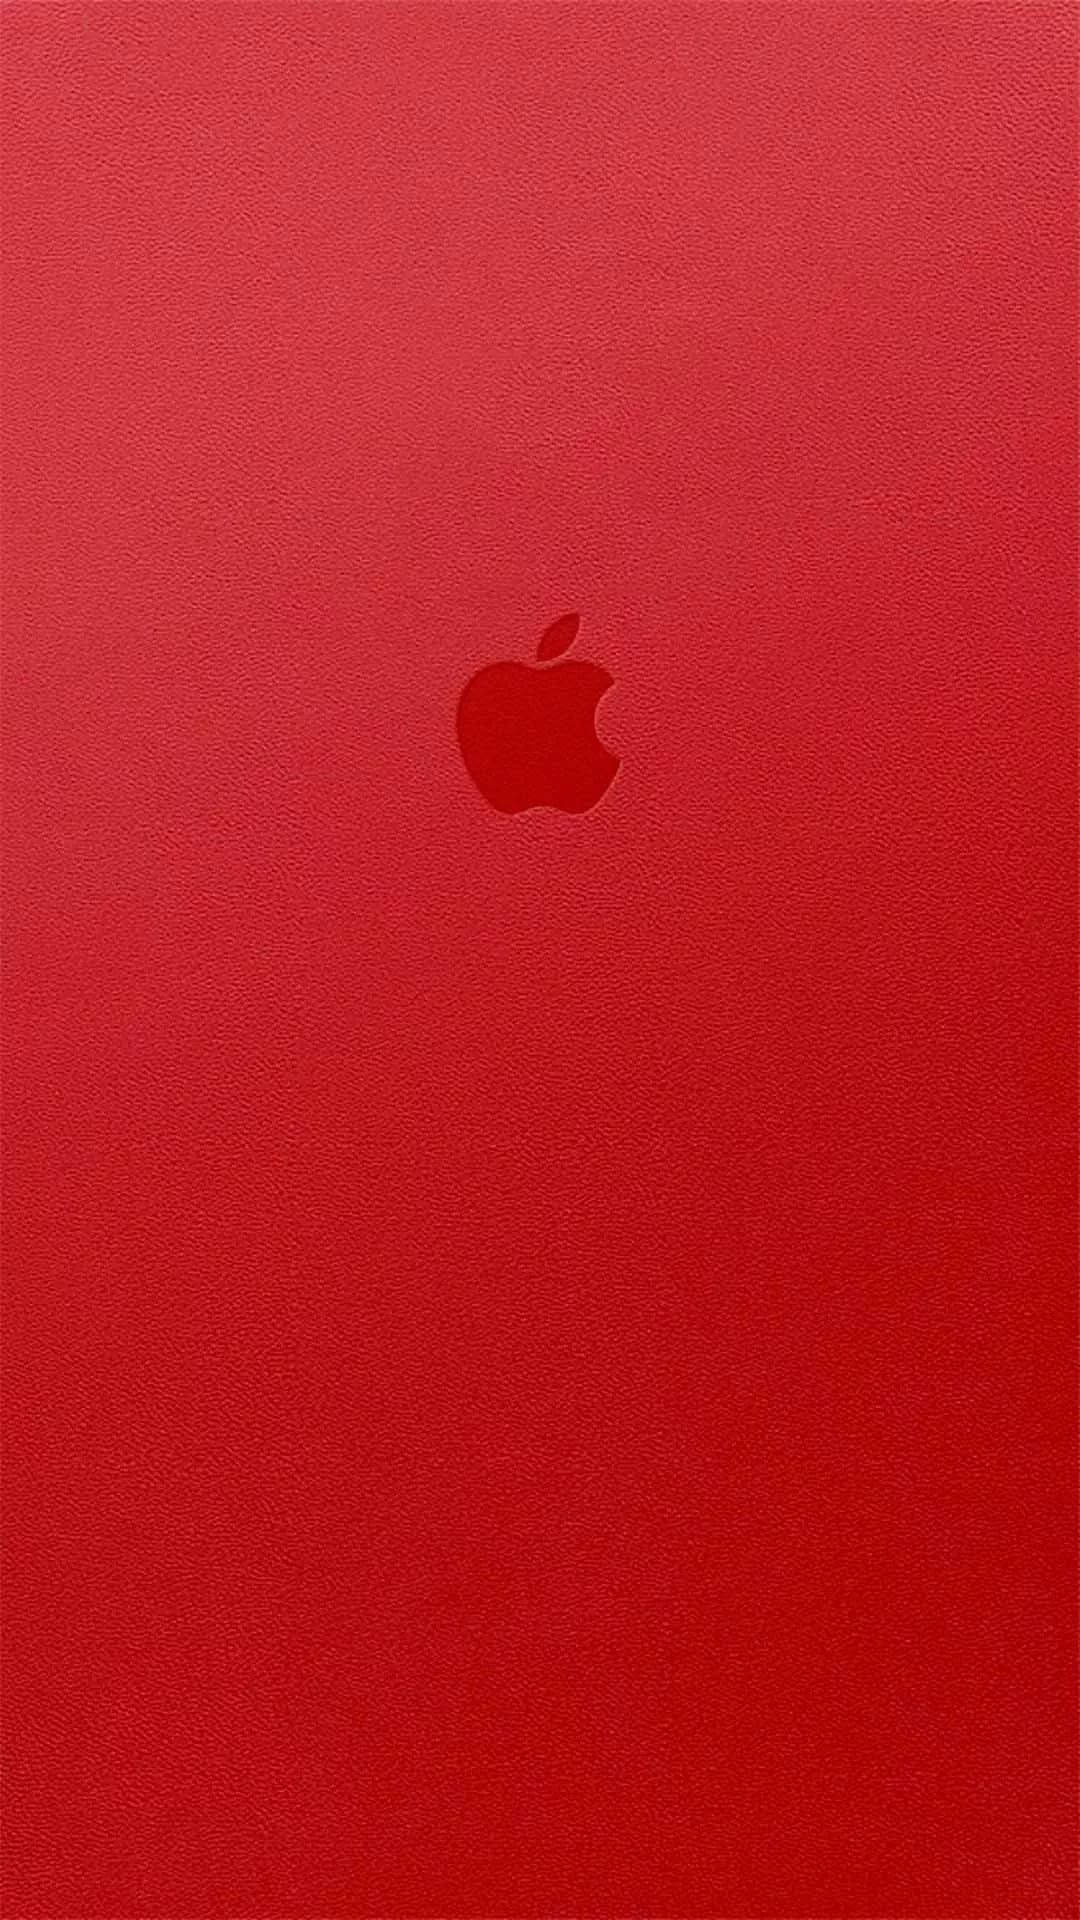 Pure Red Apple Logo